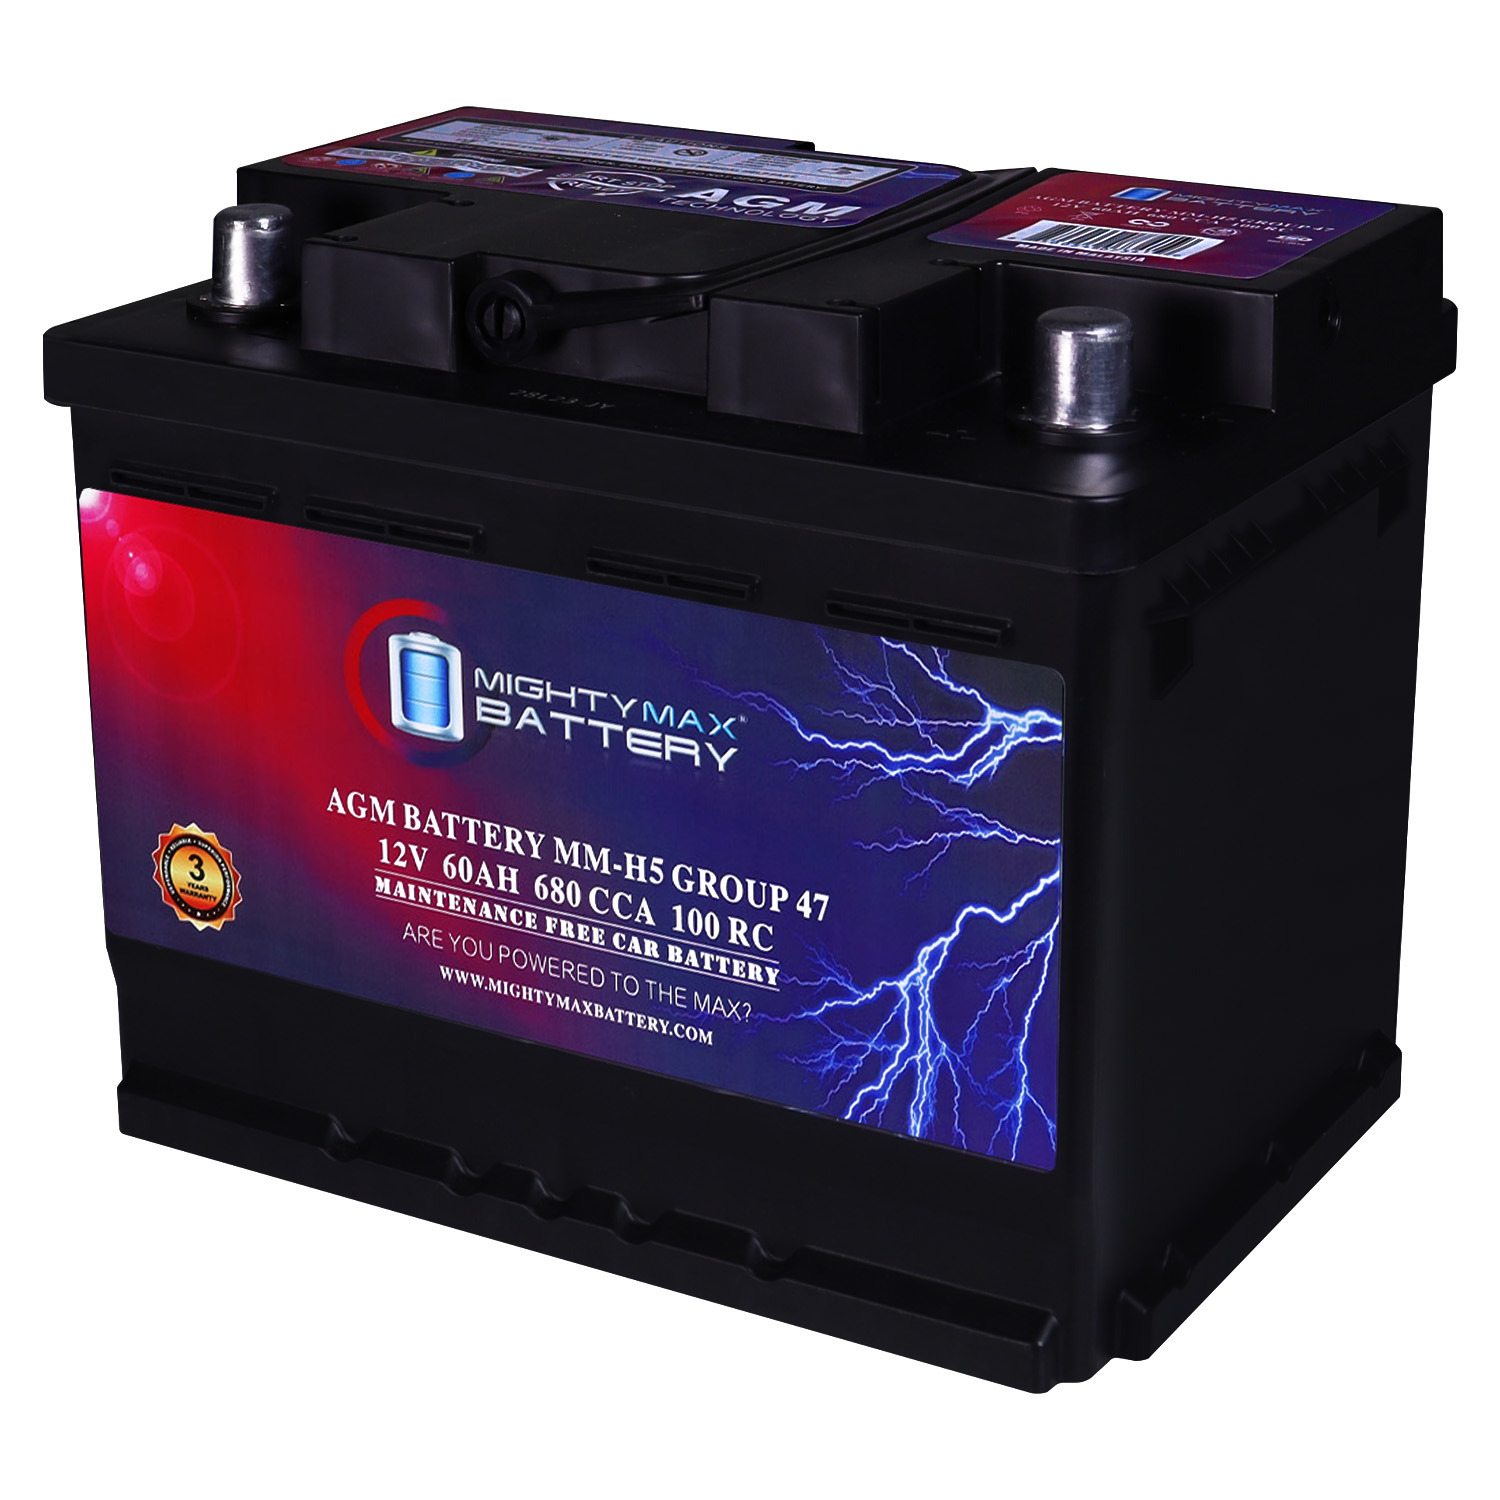 MM-H5 Group 47 12V 60AH 100RC 680CCA Replacement Battery Compatible with BMW 118i (Non-US/Canada) 07-13